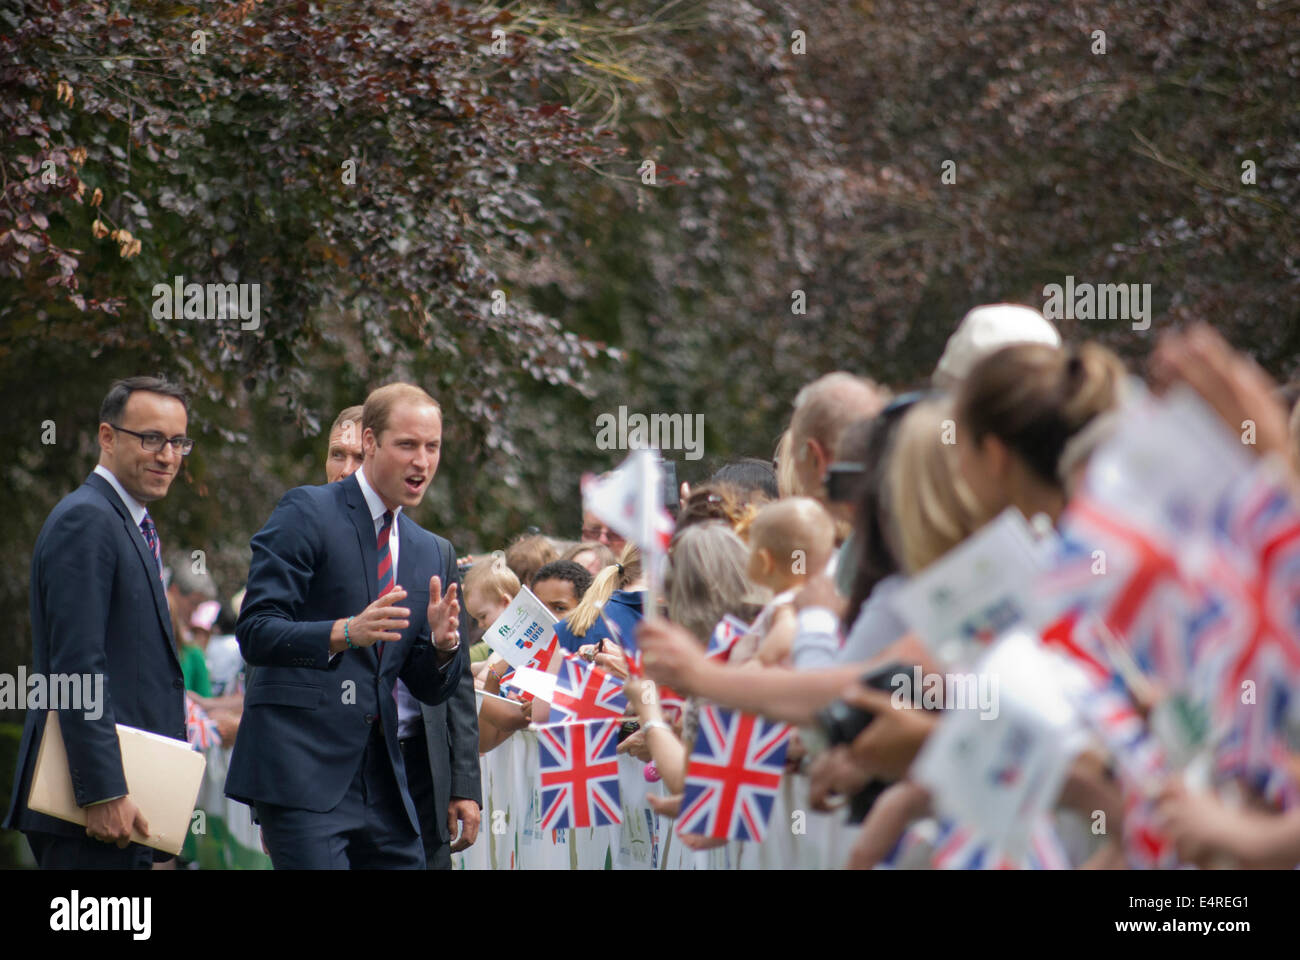 Coventry, UK. 16th July, 2014. HRH The Duke of cambridge meeting people in the crowd at The Coventry War Memorial Park Credit:  John Martin/Alamy Live News Stock Photo